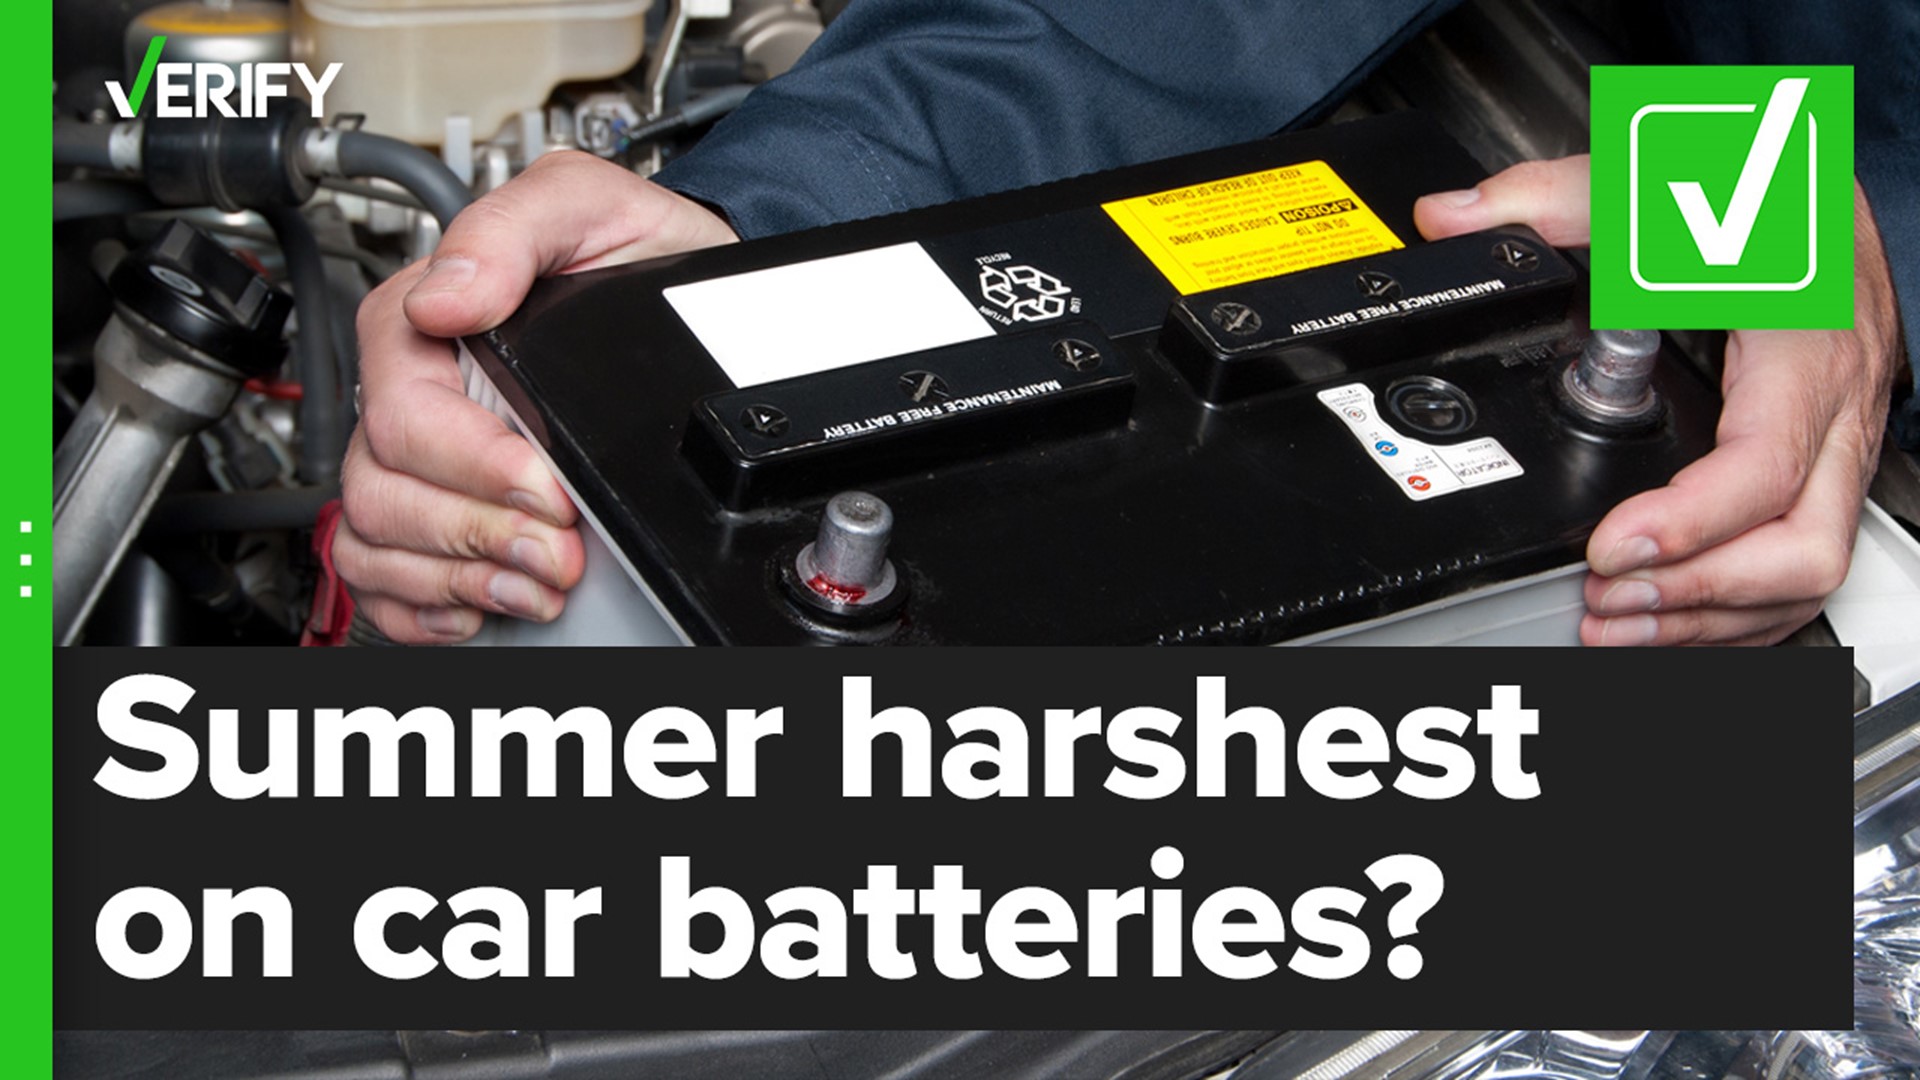 Cold weather is notorious for being tough on cars. But summer is actually harder on car batteries because heat can cause battery fluid to evaporate.